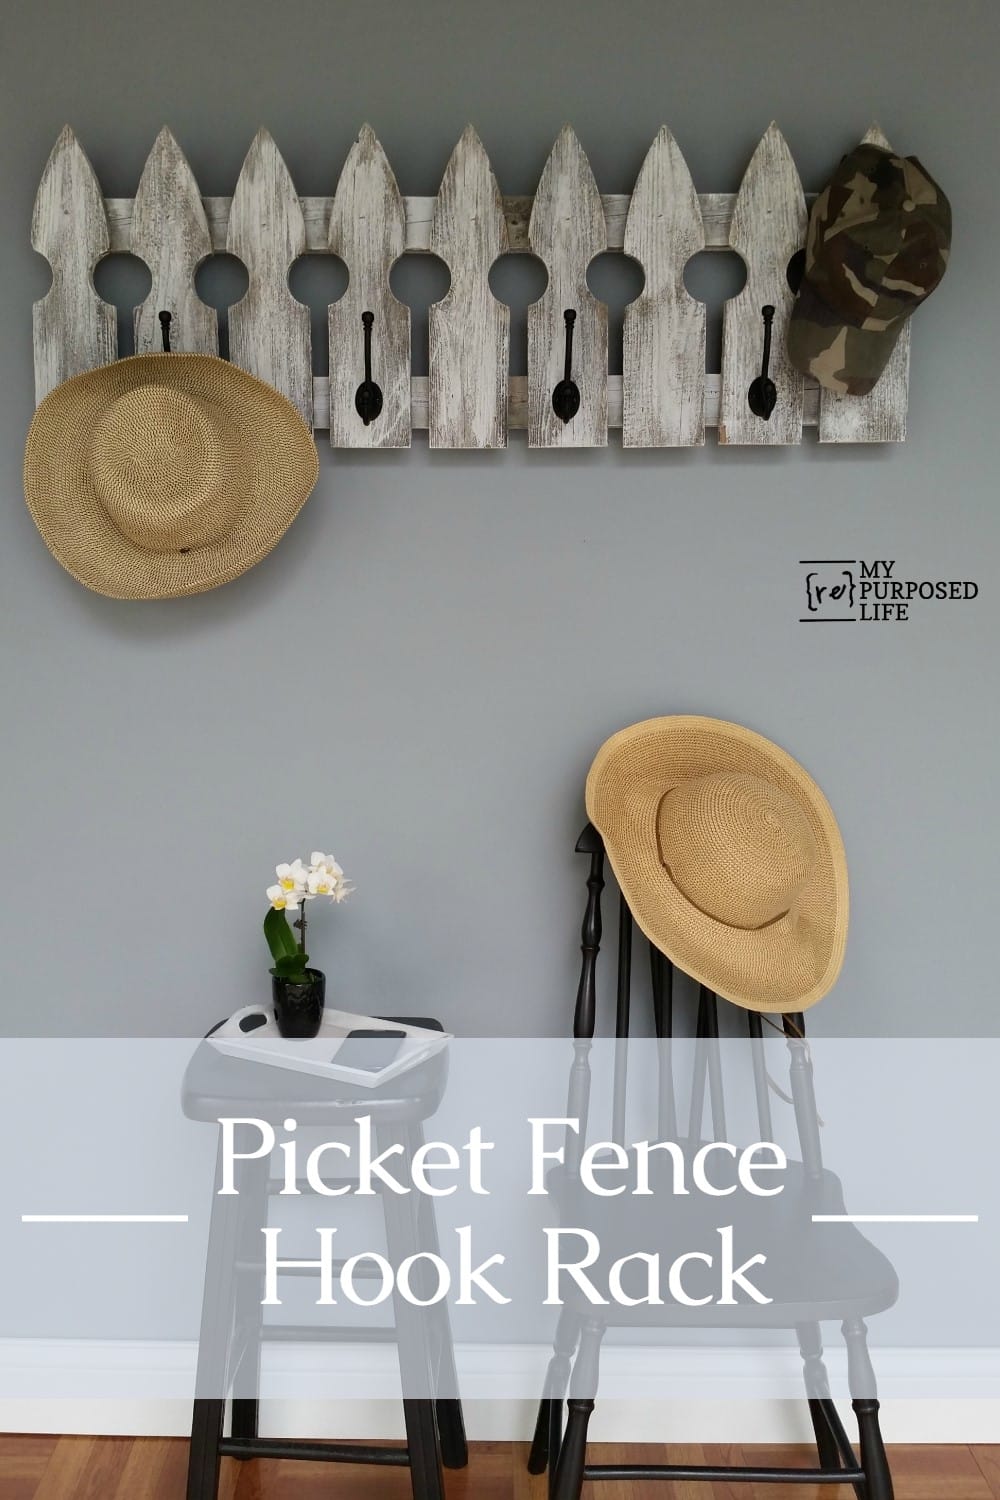 How to make this quick and easy picket fence coat rack project. The white wash is the icing on the cake to make this a perfect project for your home. #MyRepurposedLife #easy #quick #diy #project #coatrack #reclaimed #picket #fence via @repurposedlife